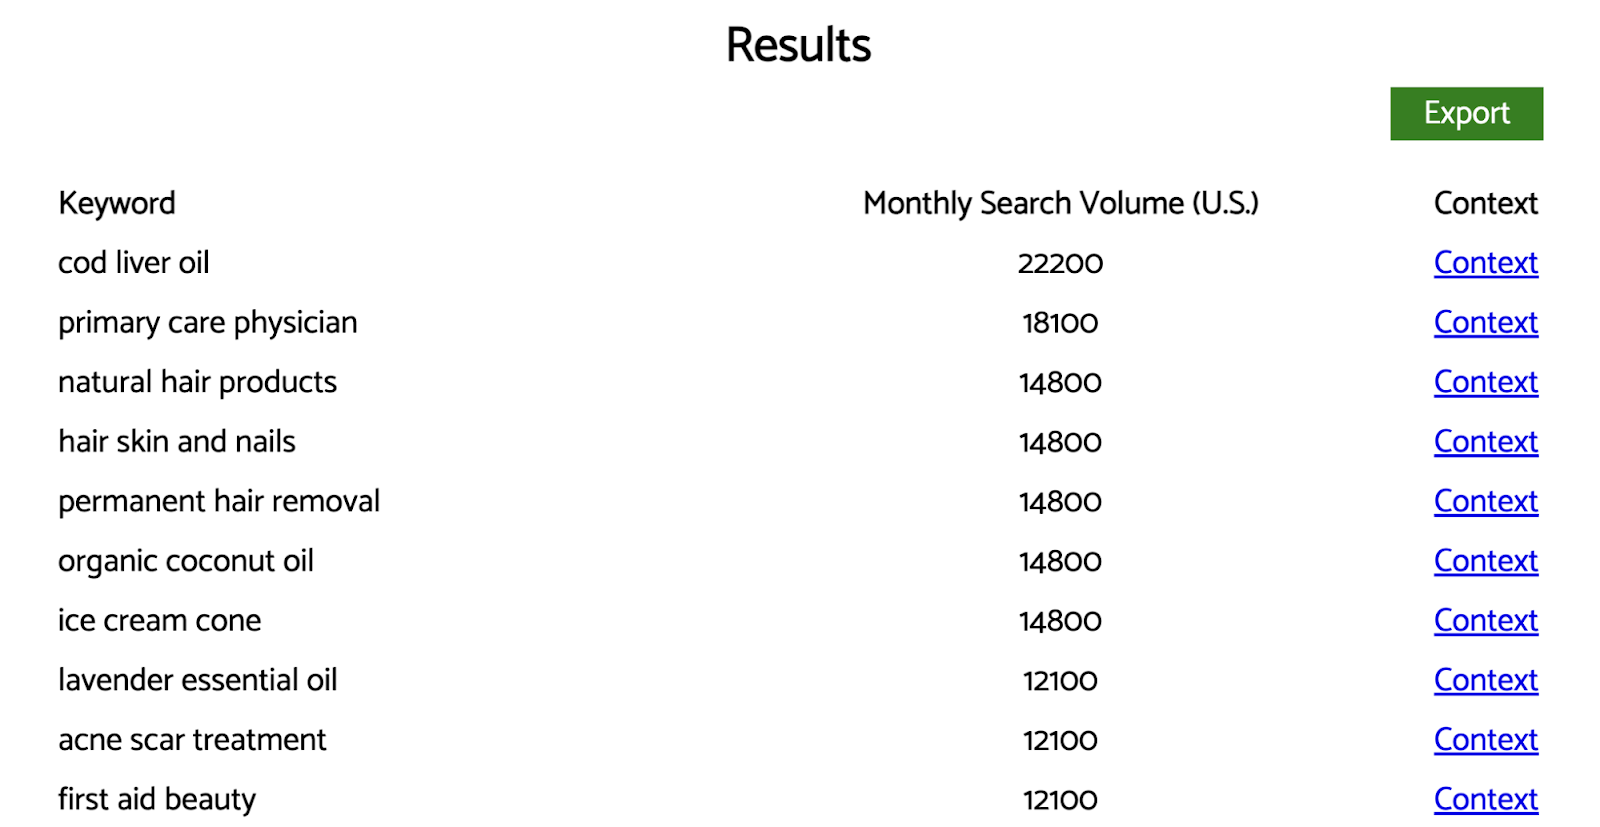 Keyworddit results are sorted according to monthly search volume in the U.S